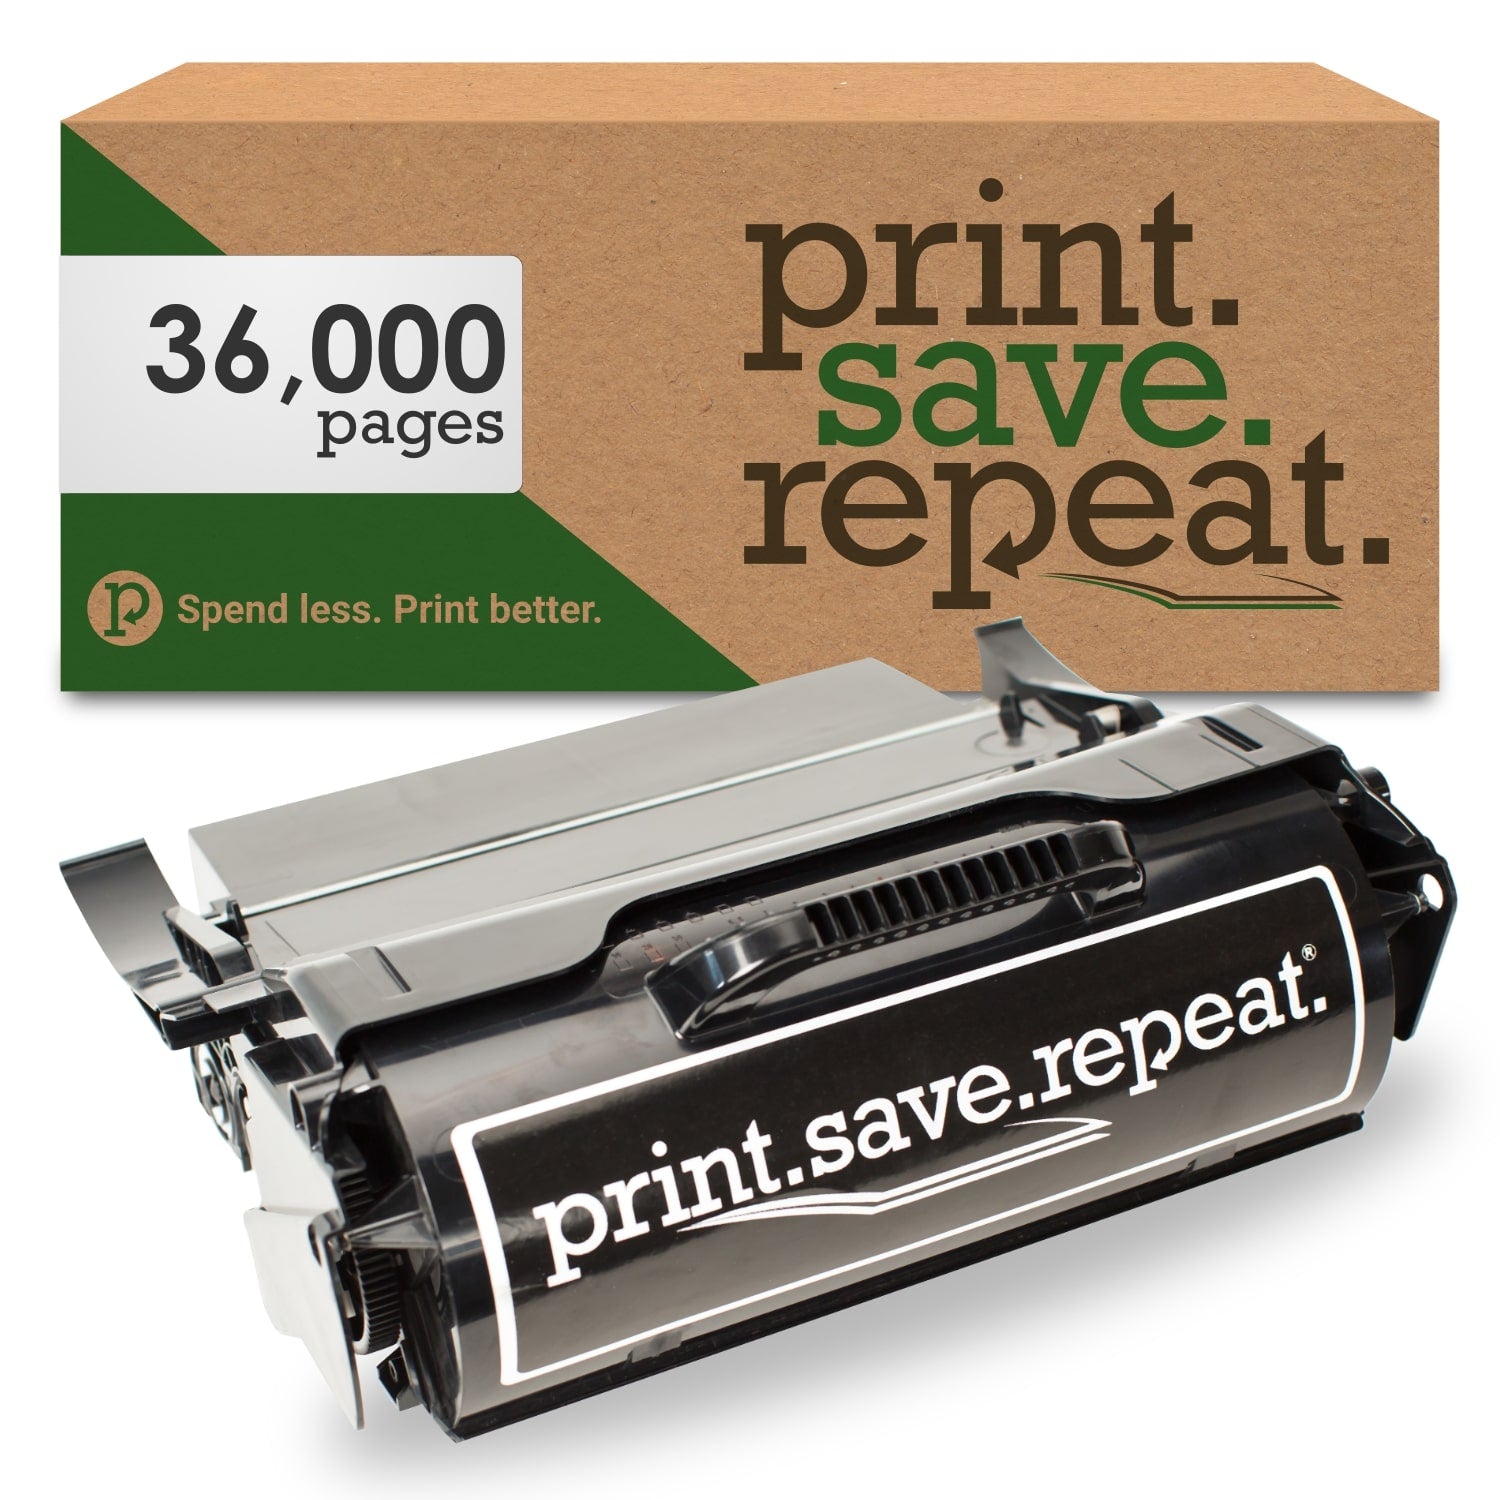 Print.Save.Repeat. Lexmark X654X11A Extra High Yield Remanufactured Toner Cartridge for X654, X656, X658 [36,000 Pages]